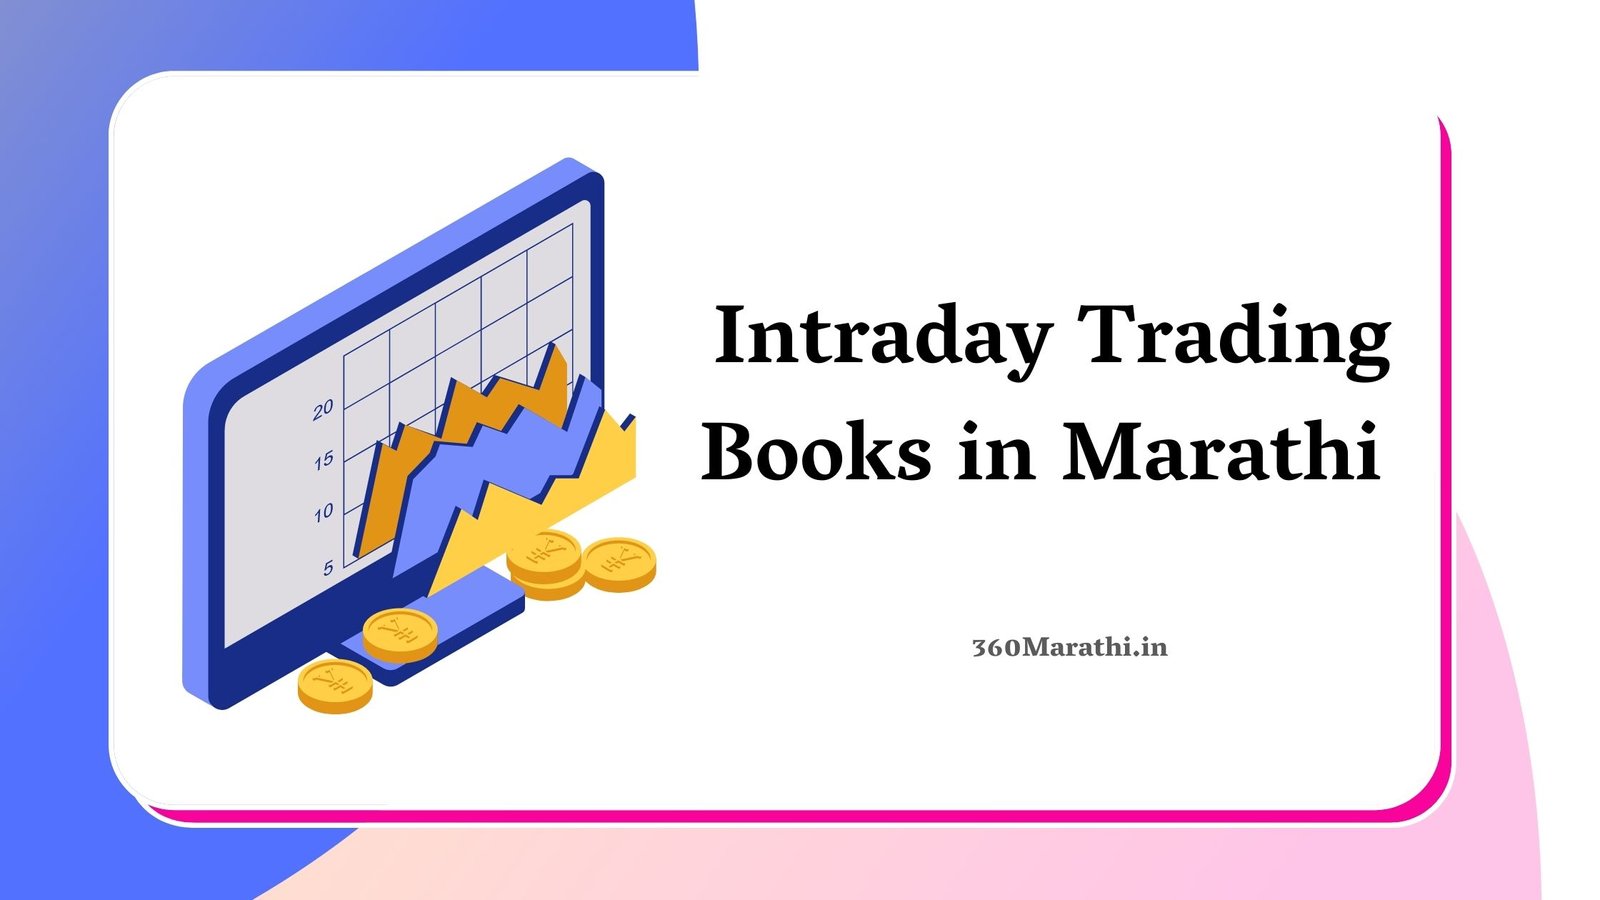 Intraday Trading Books in Marathi